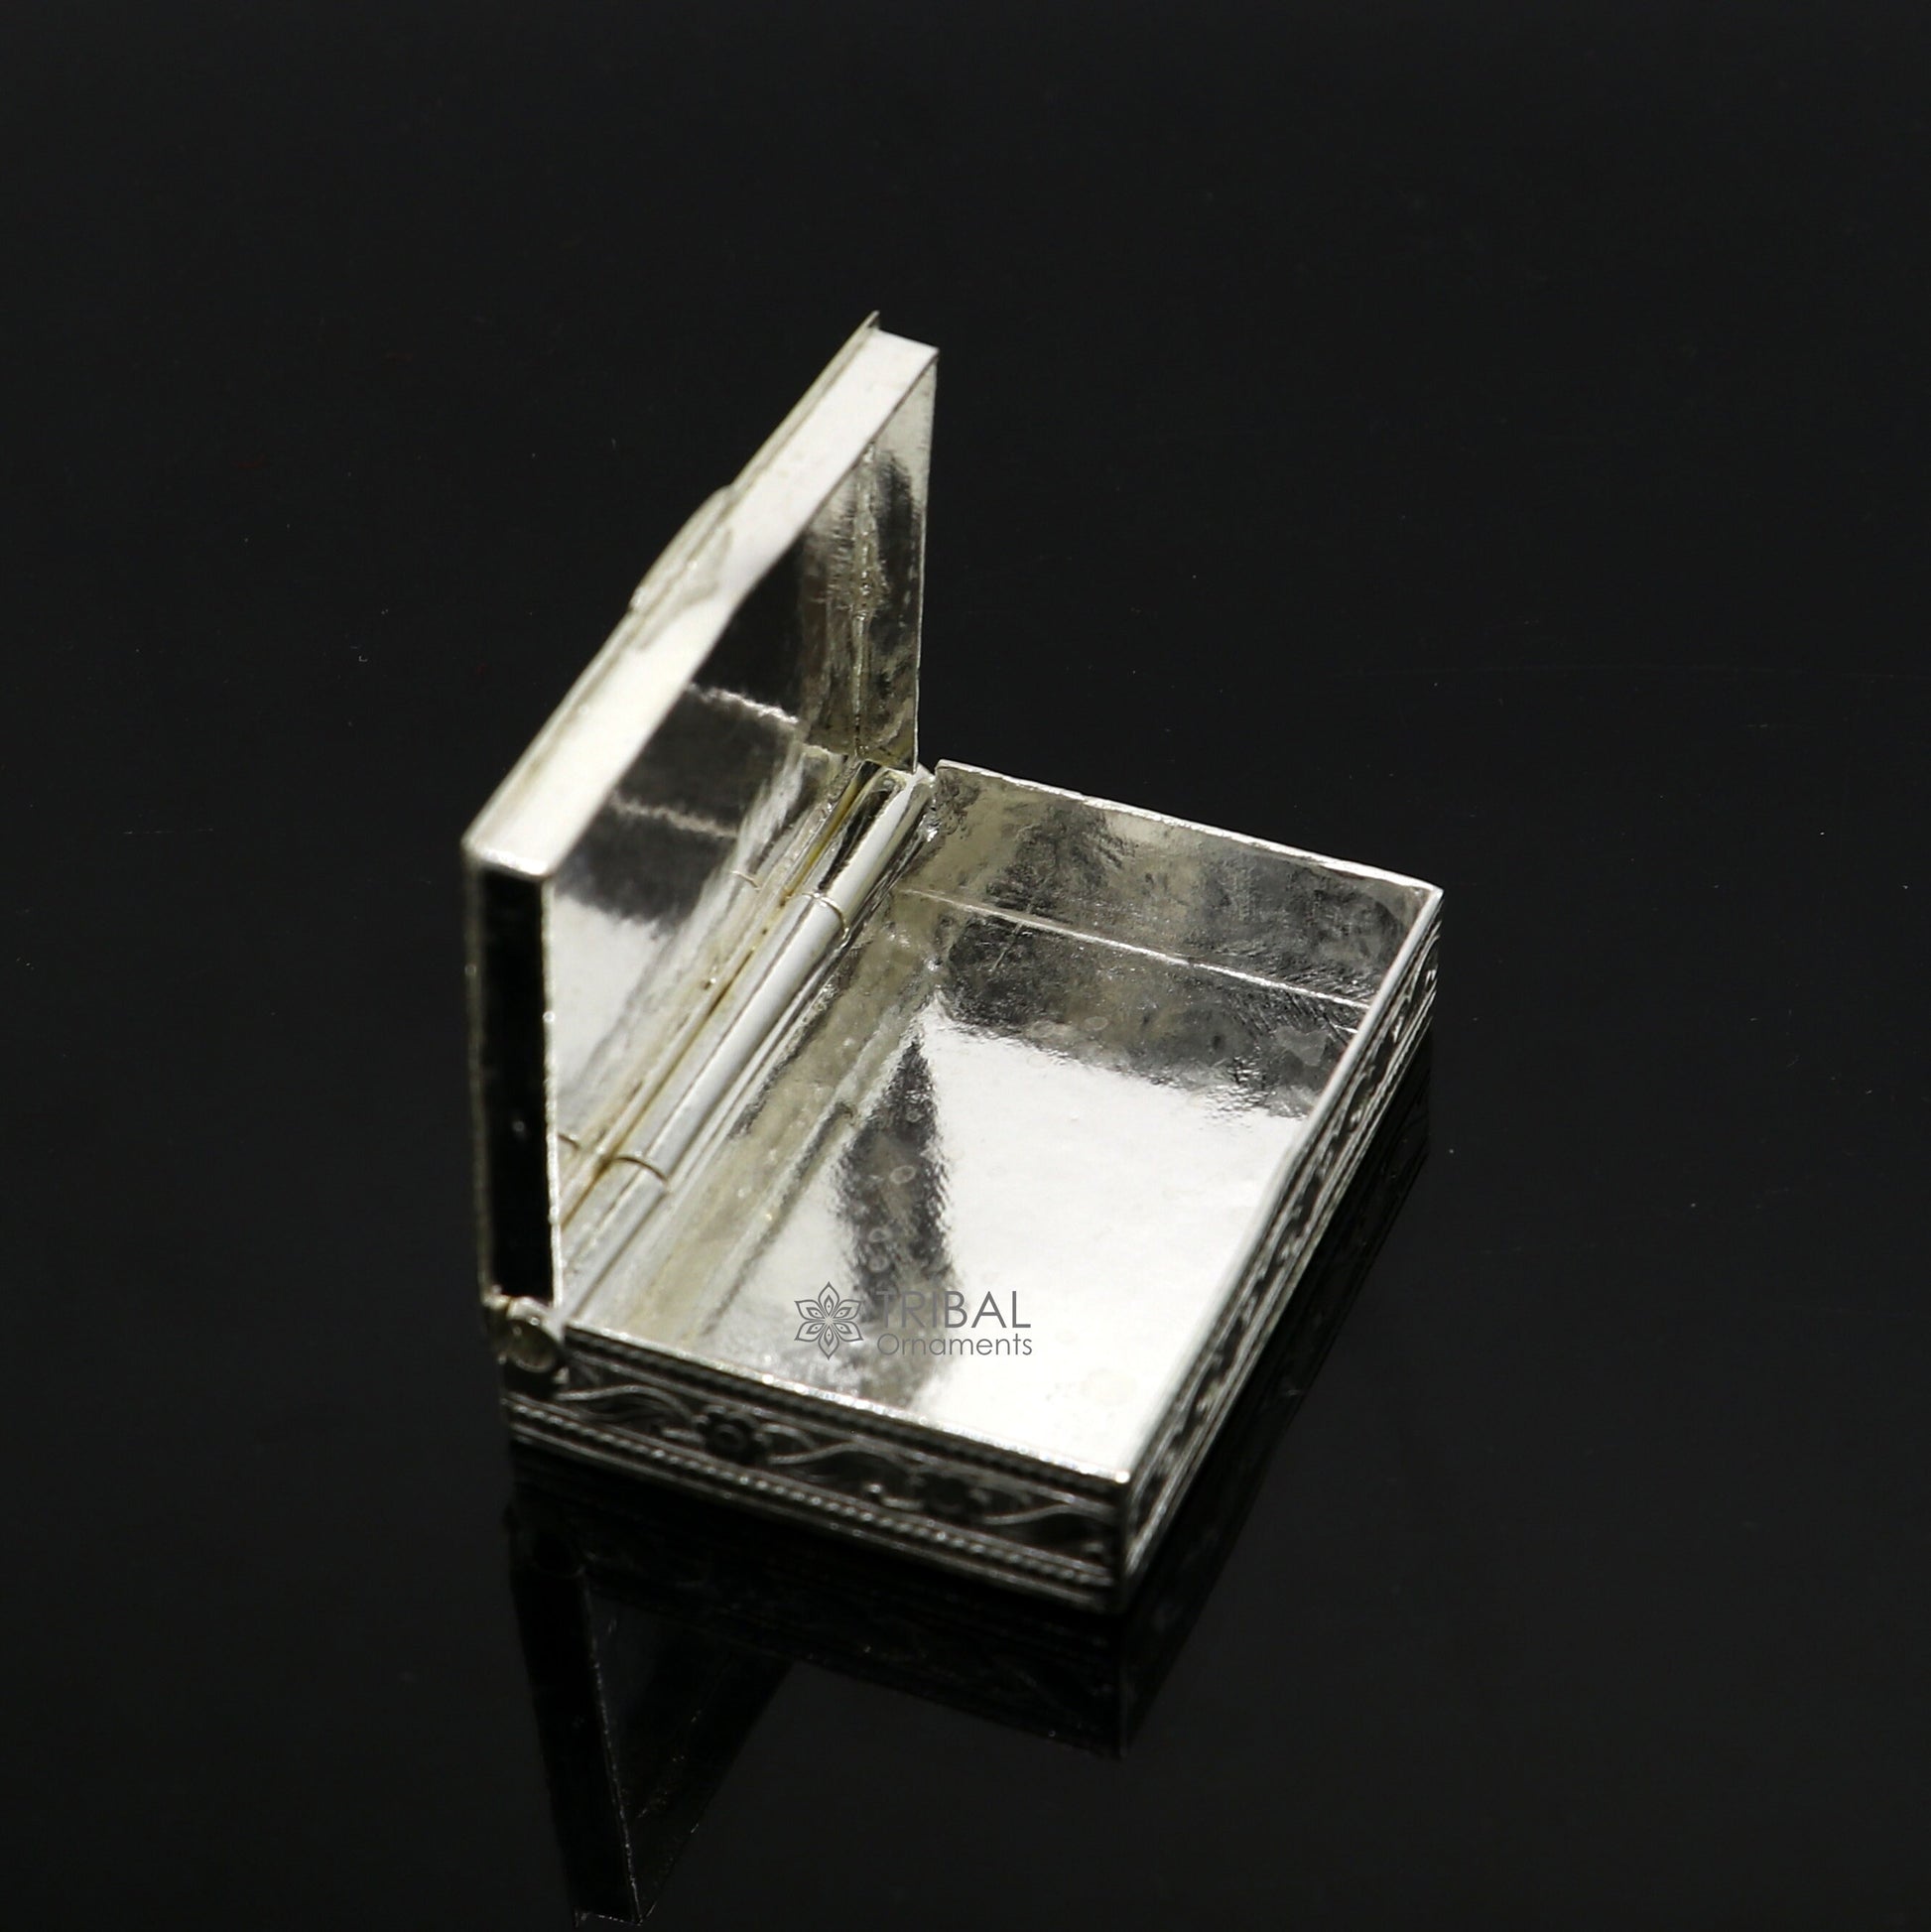 2"X1.2" 925 sterling silver trinket box, kajal box/casket box brides rectangle shape box collection, container box, eyeliner box stb821 - TRIBAL ORNAMENTS